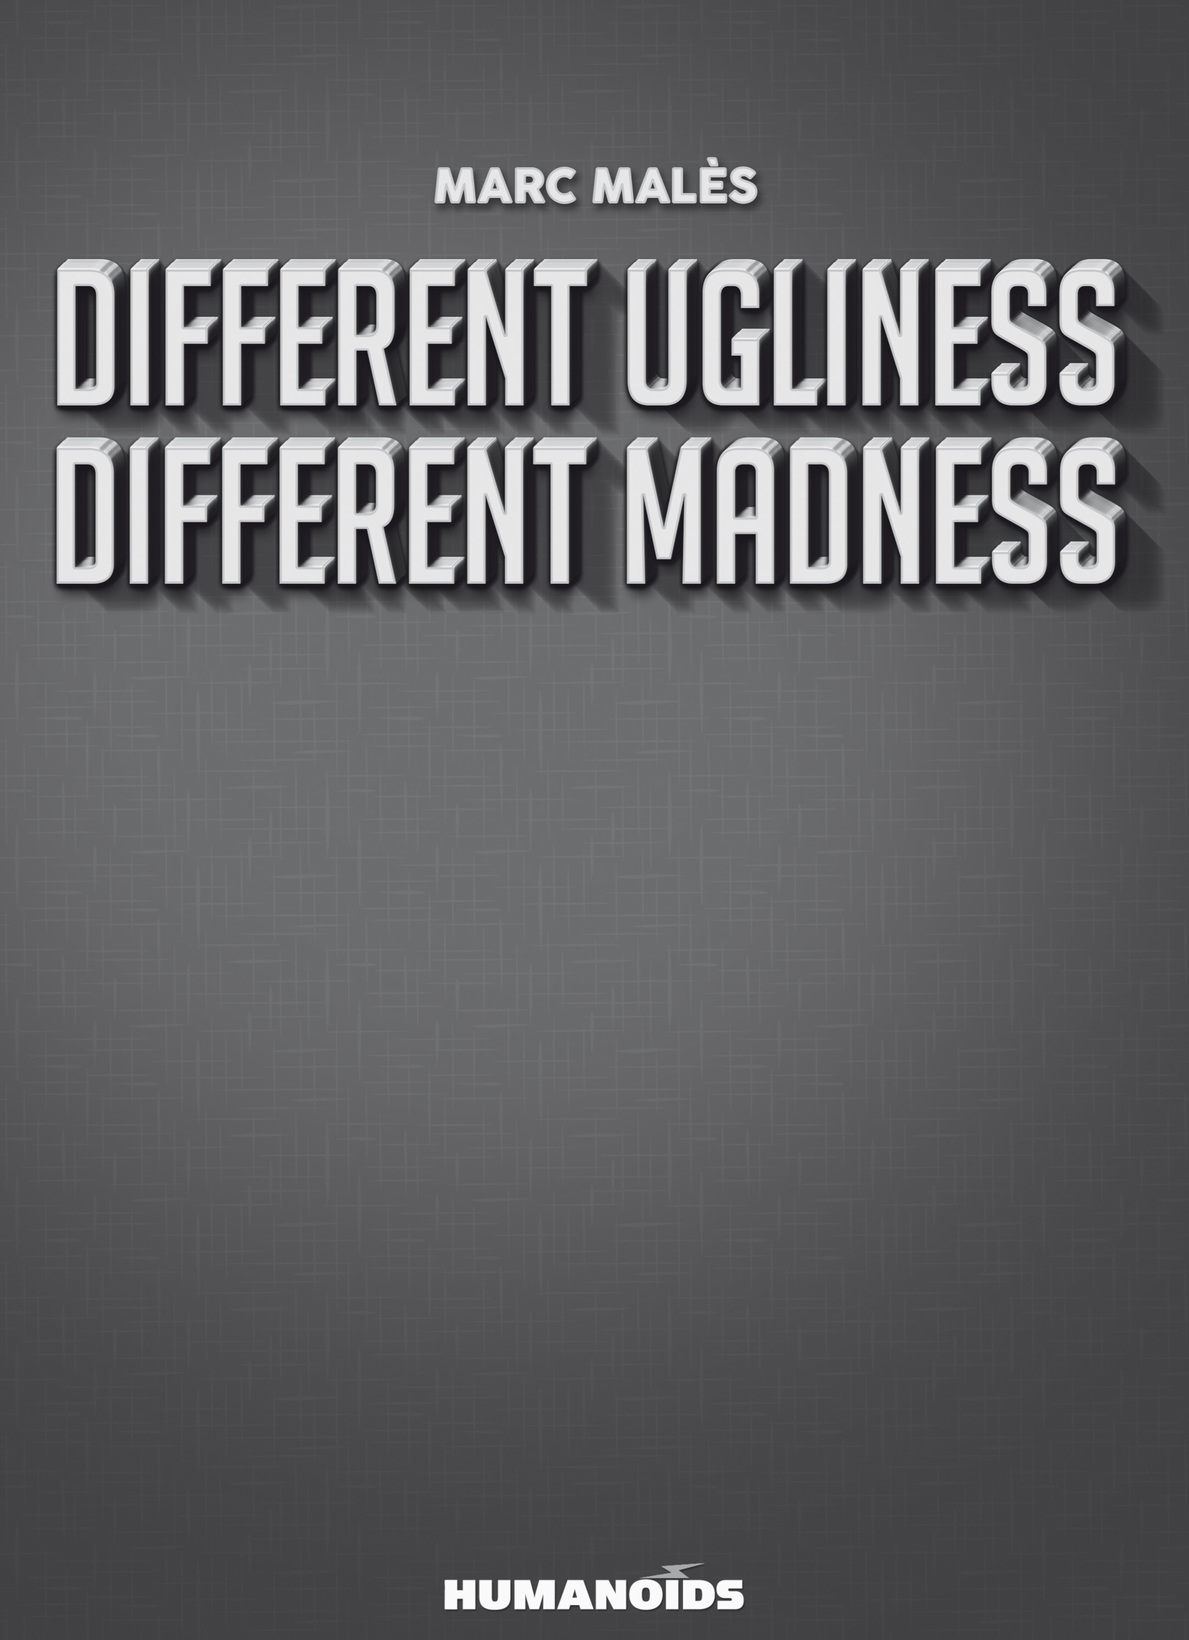 Read online Different Ugliness, Different Madness comic -  Issue # TPB 1 - 8